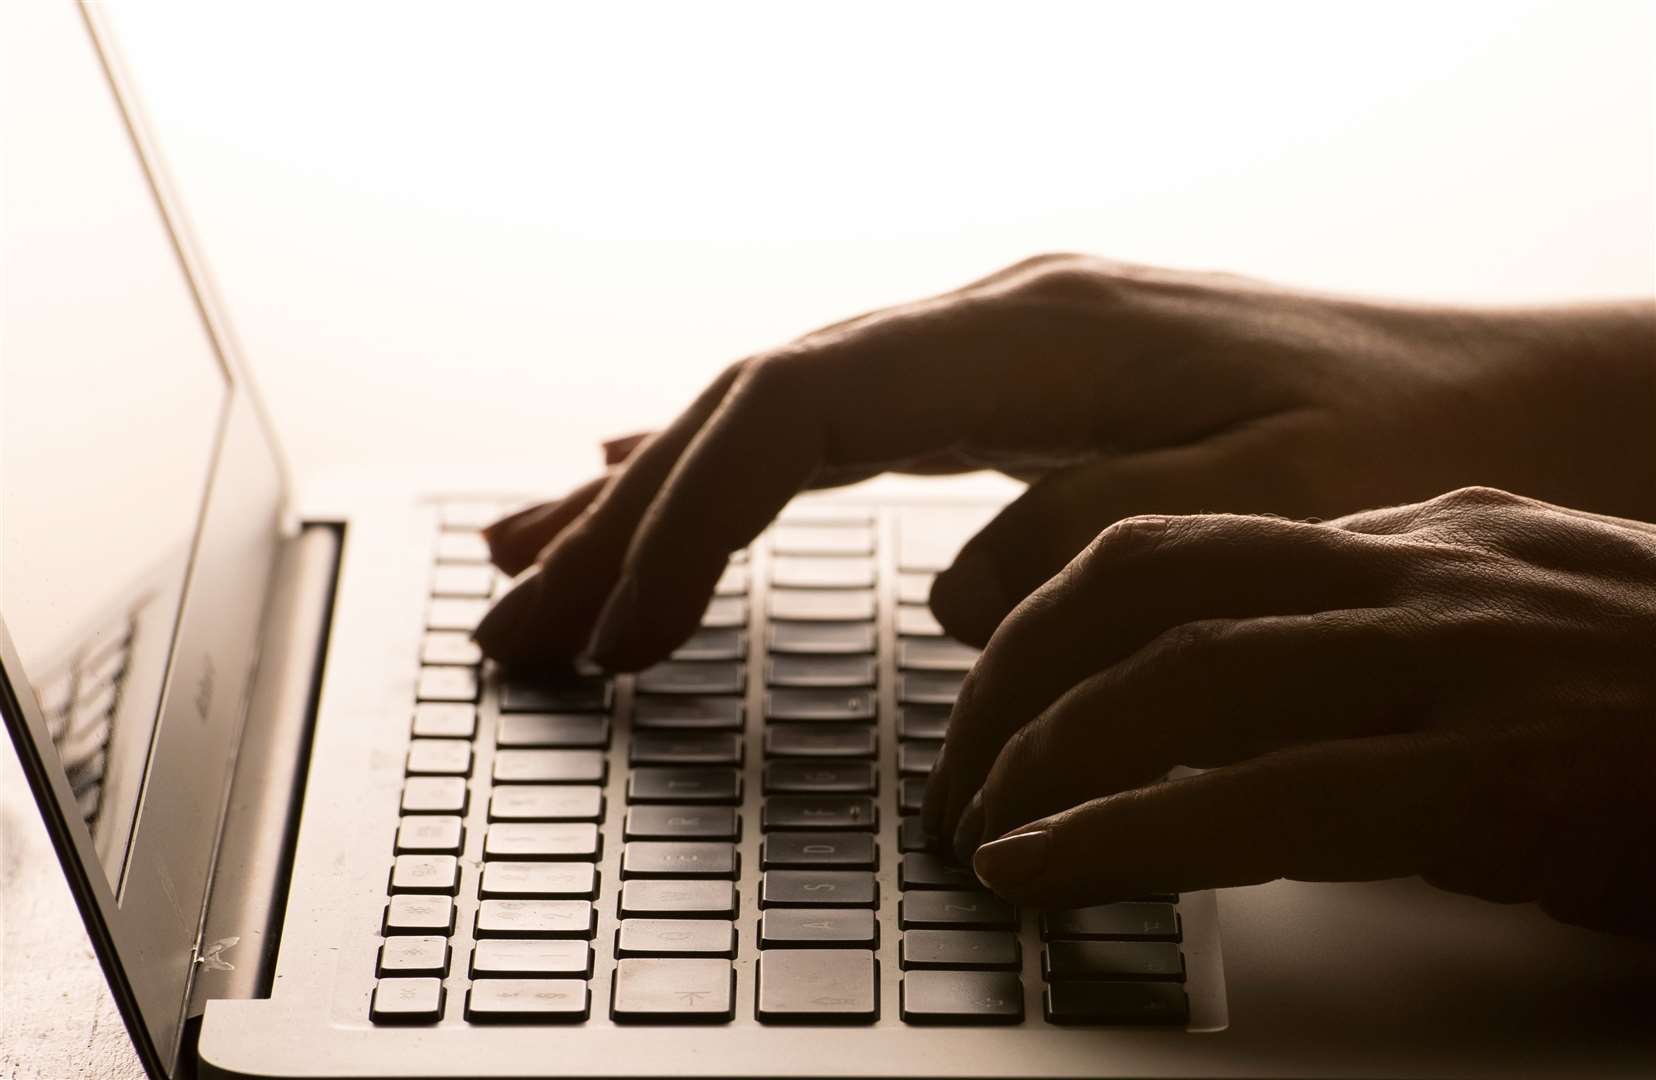 Christopher McCann downloaded indecent images on his laptop. Stock image